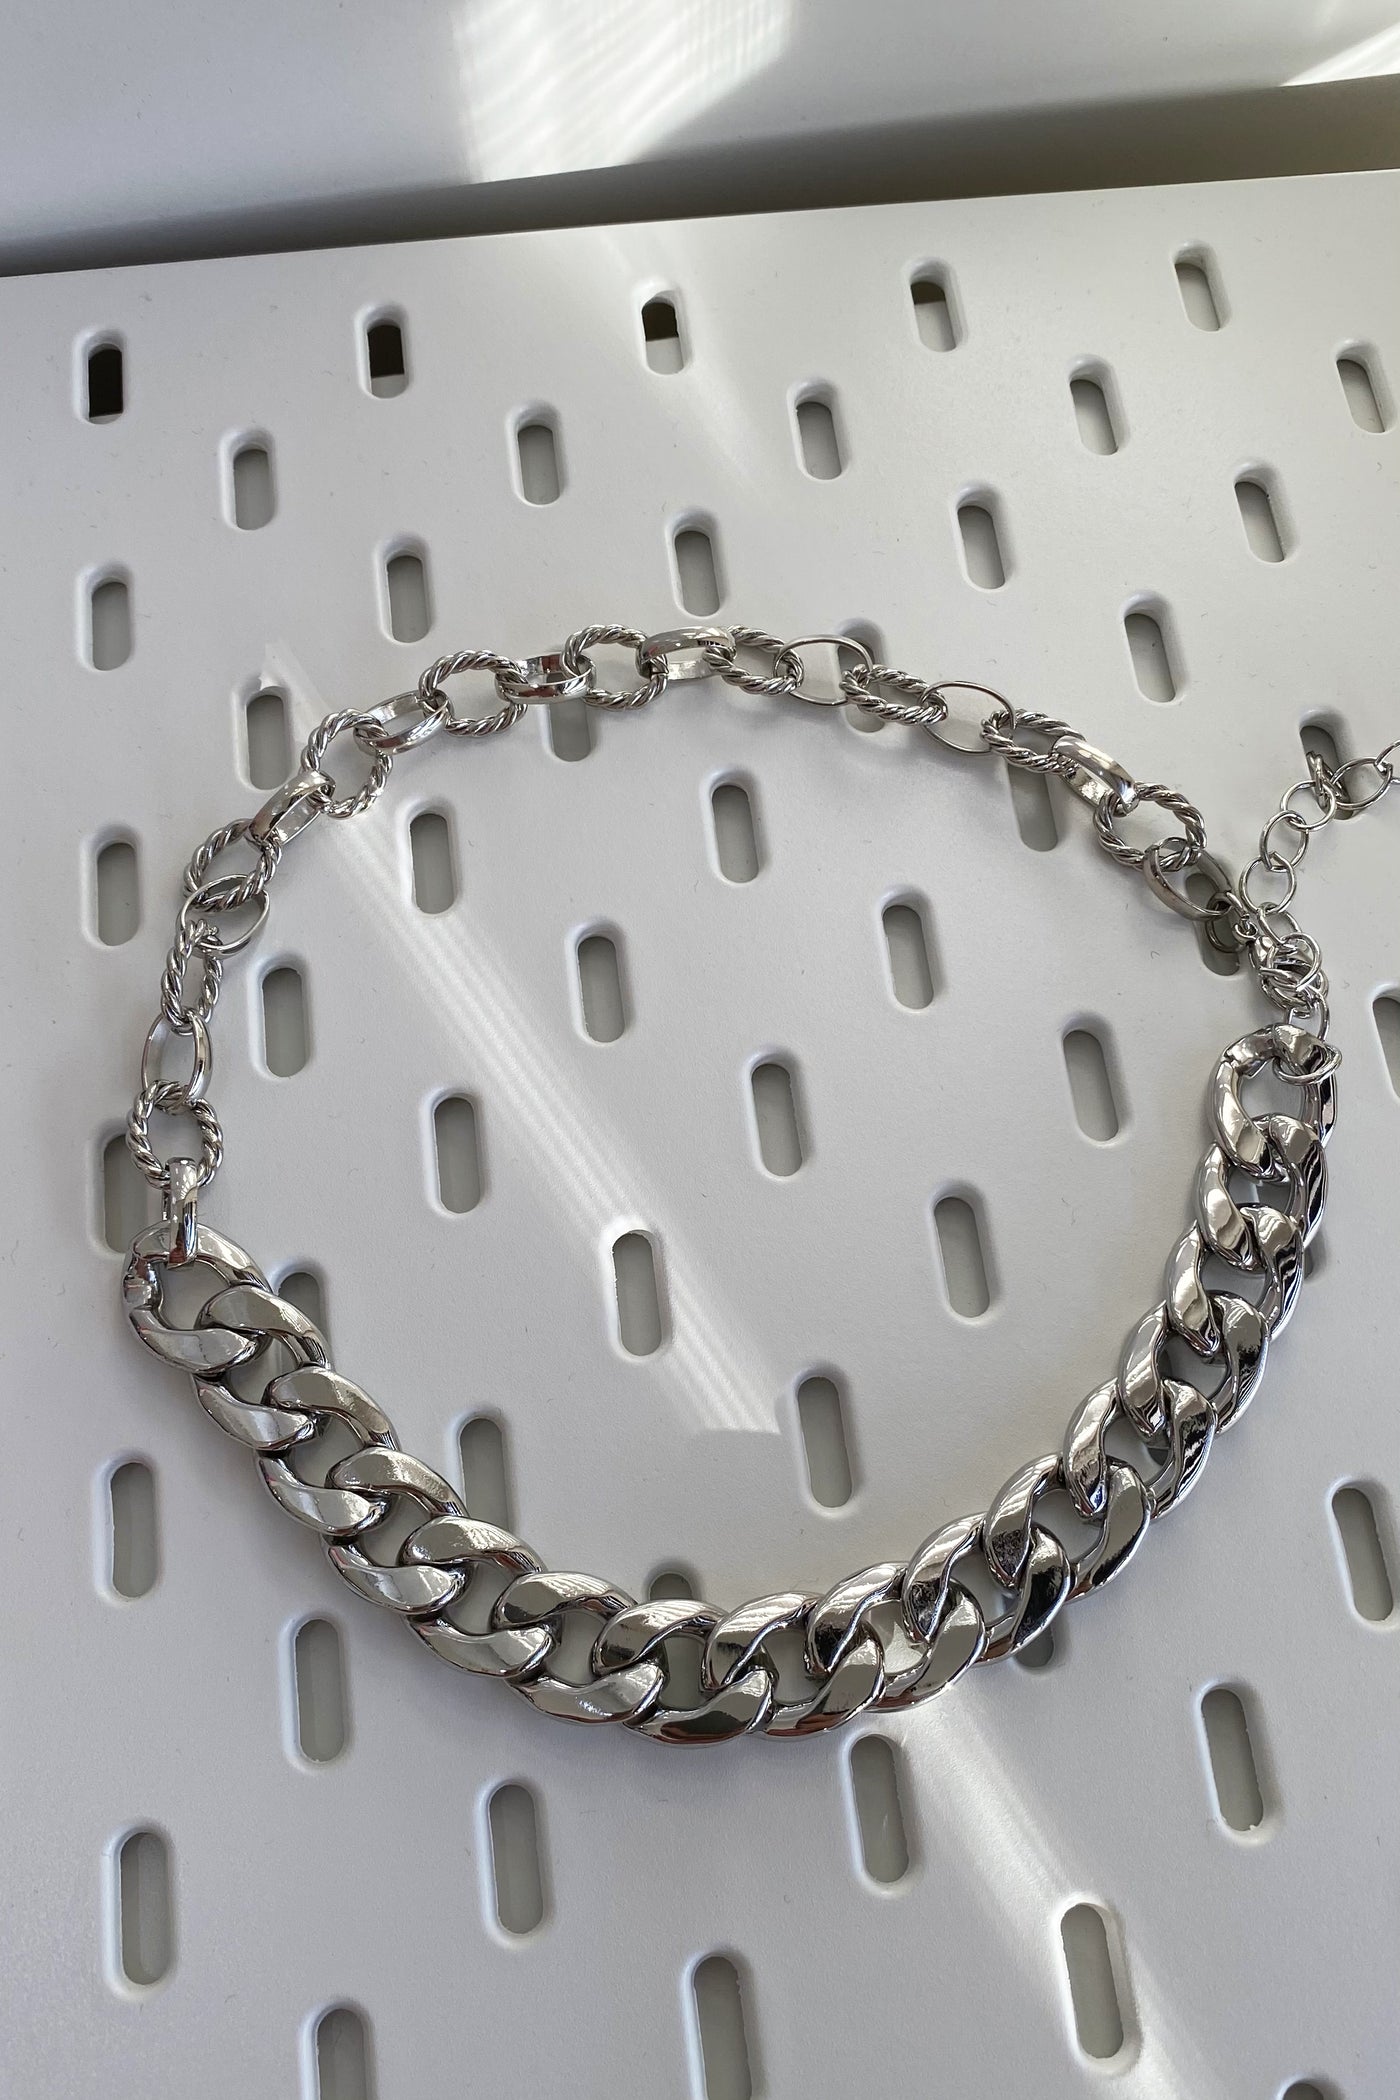 Chain Reaction Chunky Necklace - Silver